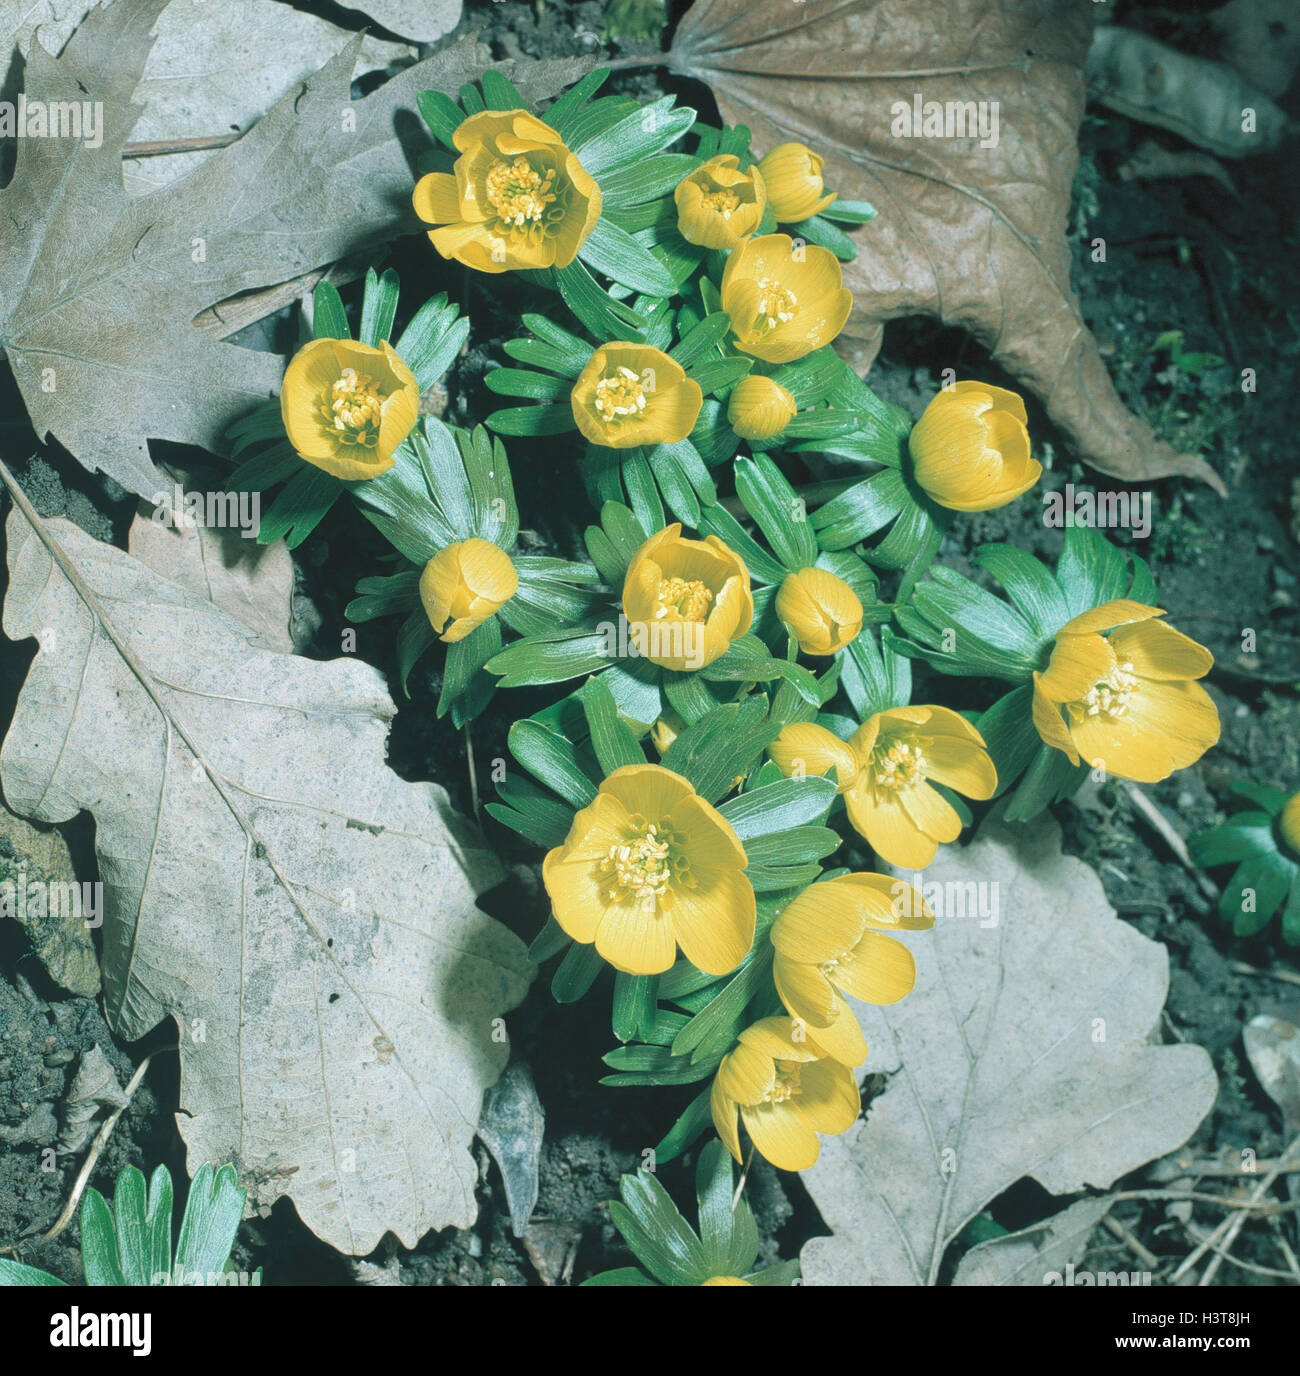 Winterling, Eranthis hiemalis forest floor, plants, flowers, crowfoot plants, blossom, blossoms, yellow, botany, leaves, foliage, outside Stock Photo